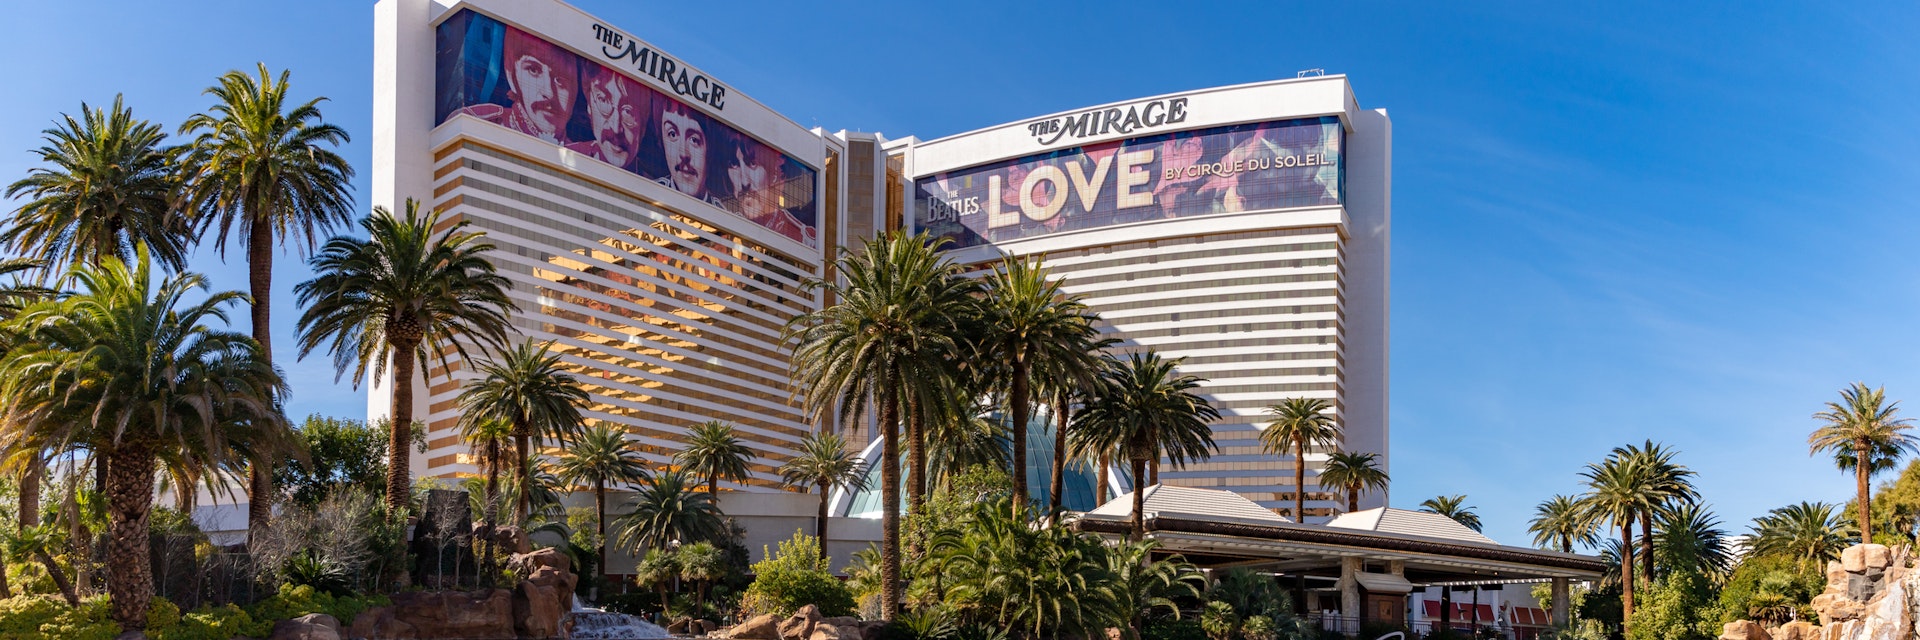 Las Vegas, United States - November 24, 2022: A picture of the Mirage with a large ad of the show Love by Cirque du Soleil, about the Beatles, on its facade.
1482890627
america, band, beatles, betting, building, entertainment, love, palm trees, show, signs, sin city, the mirage, trees, tropical, united states, united states of america, vegas